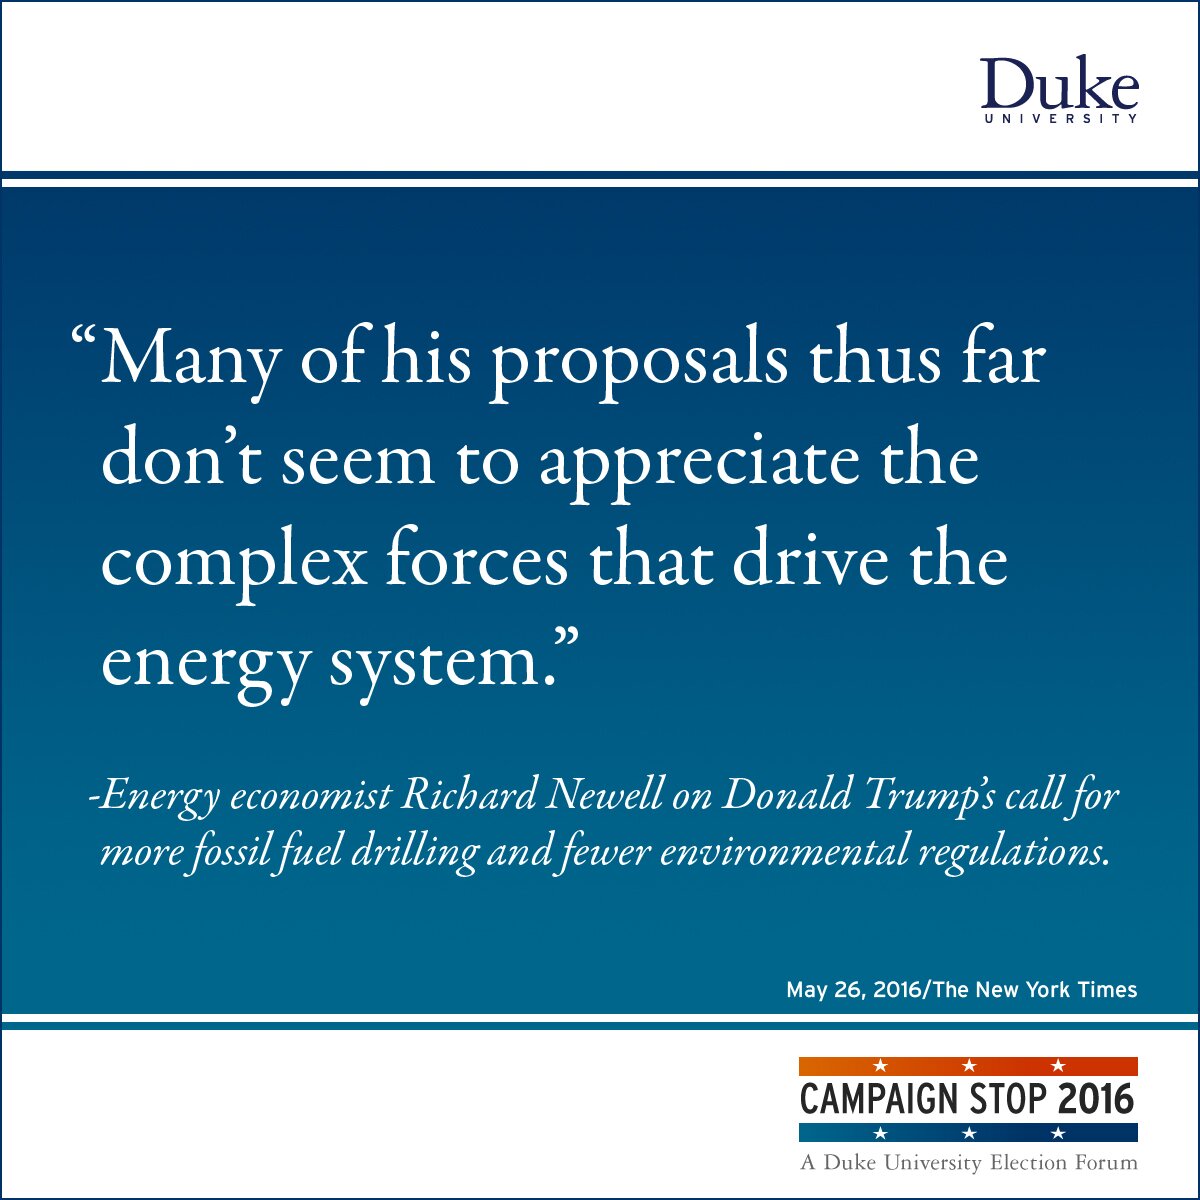 “Many of his proposals thus far don’t seem to appreciate the complex forces that drive the energy system.” -Energy economist Richard Newell on Donald Trump’s call for more fossil fuel drilling and fewer environmental regulations.